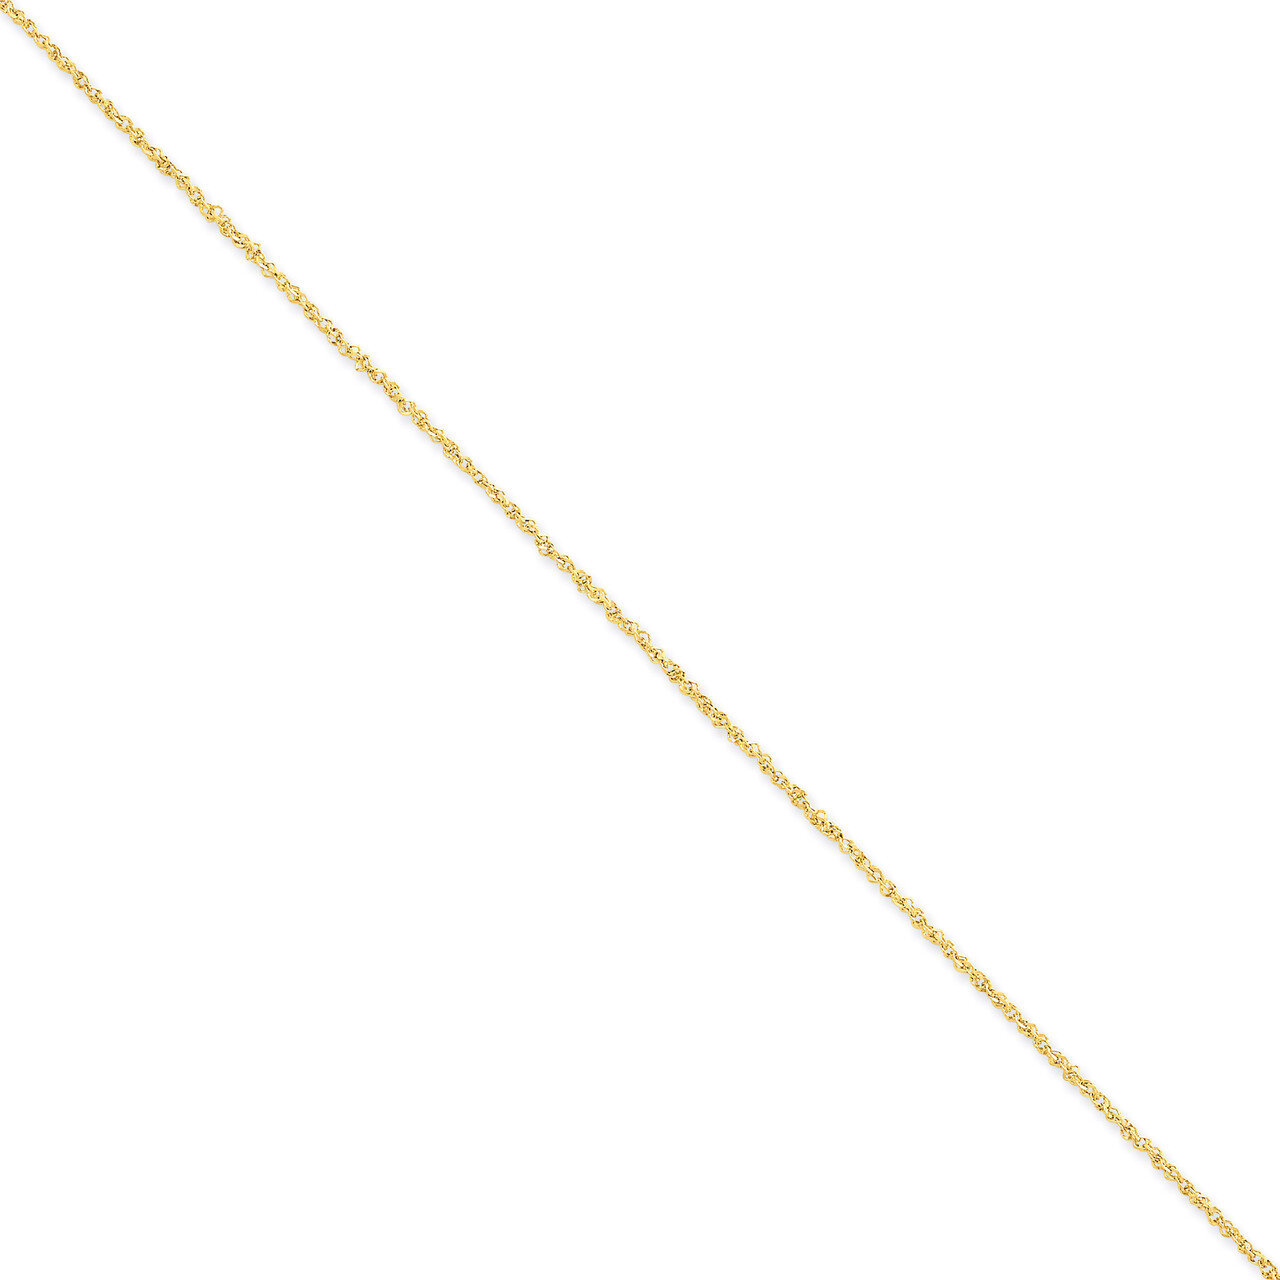 1.7mm Ropa Chain 18 Inch 14k Gold RPA028-18